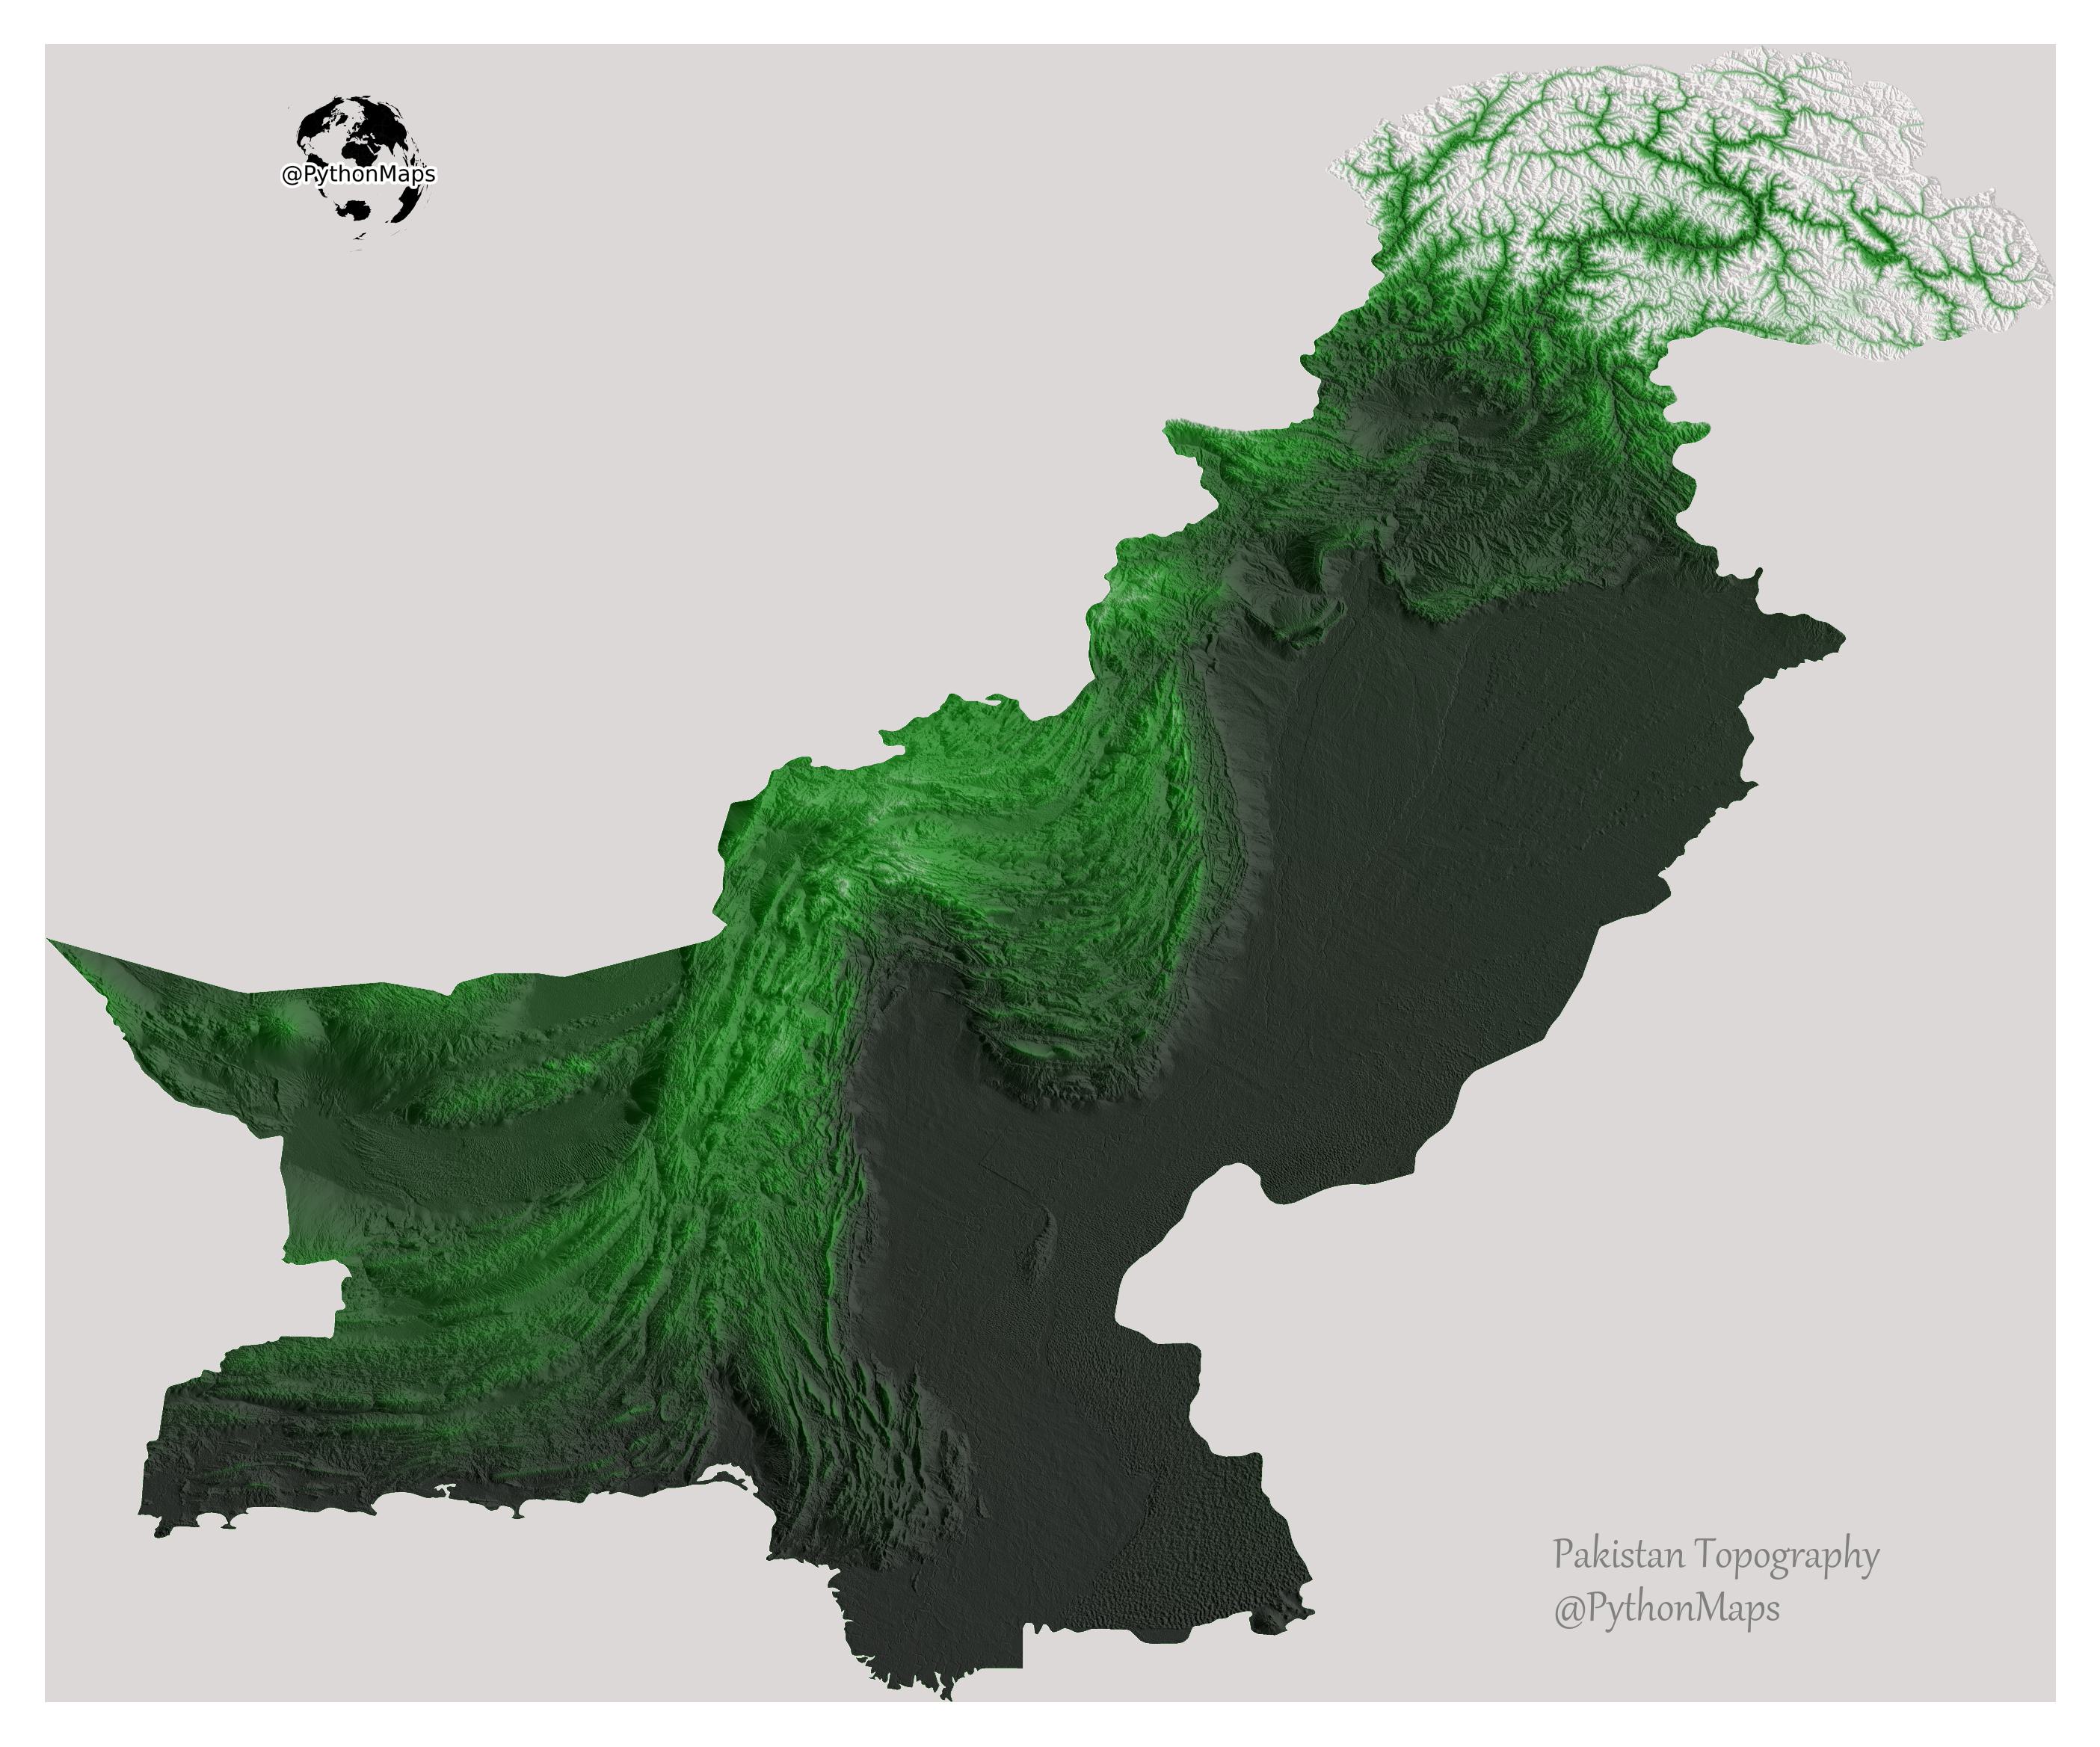 The Topography of Pakistan